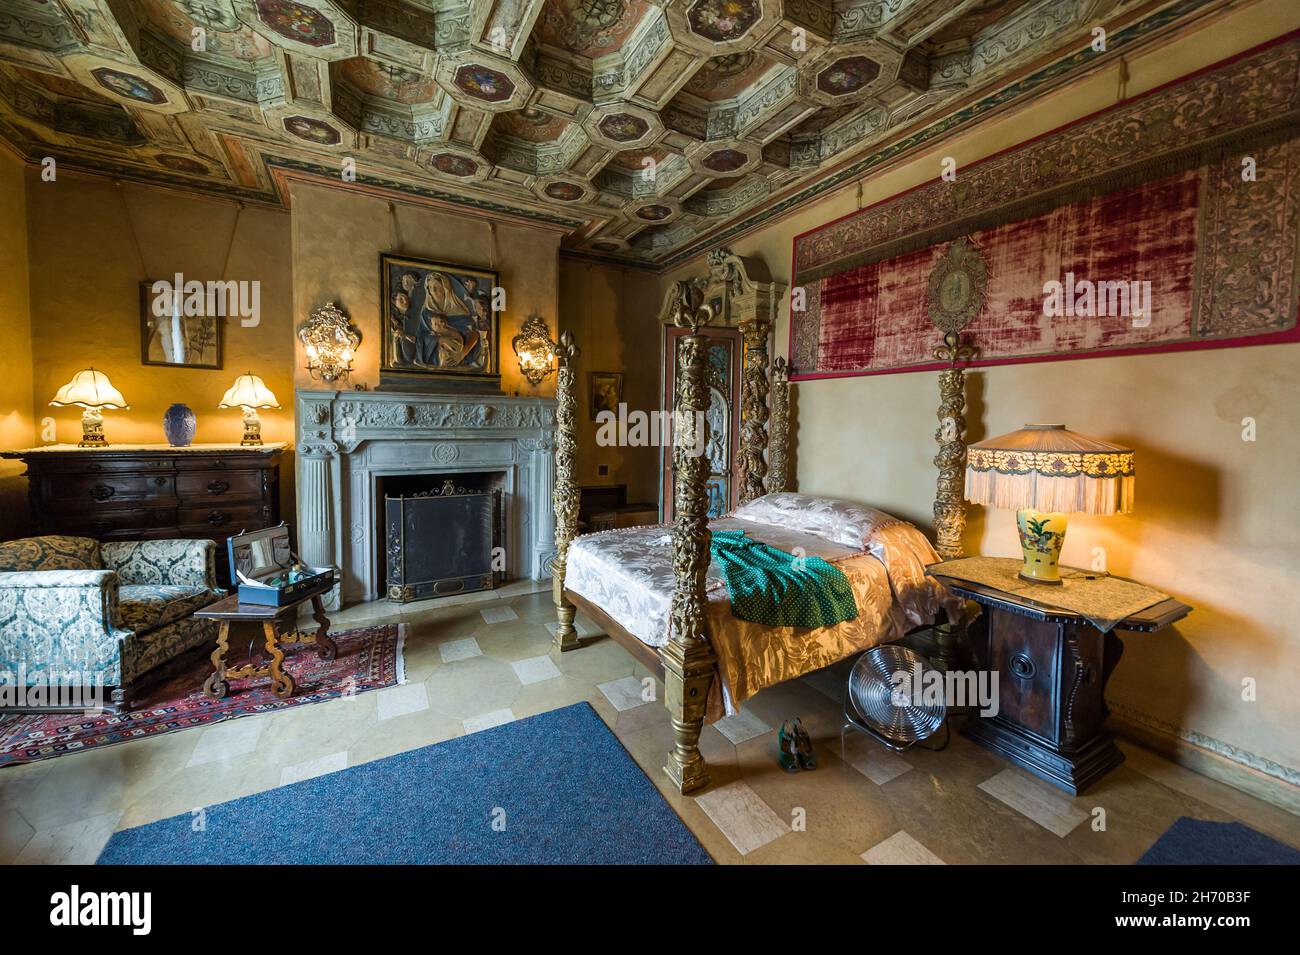 California, USA, 09 Jun 2013: Beautiful and luxurious bedroom with intricate carvings and designs at Hearst Castle., which is a National and Californi Stock Photo